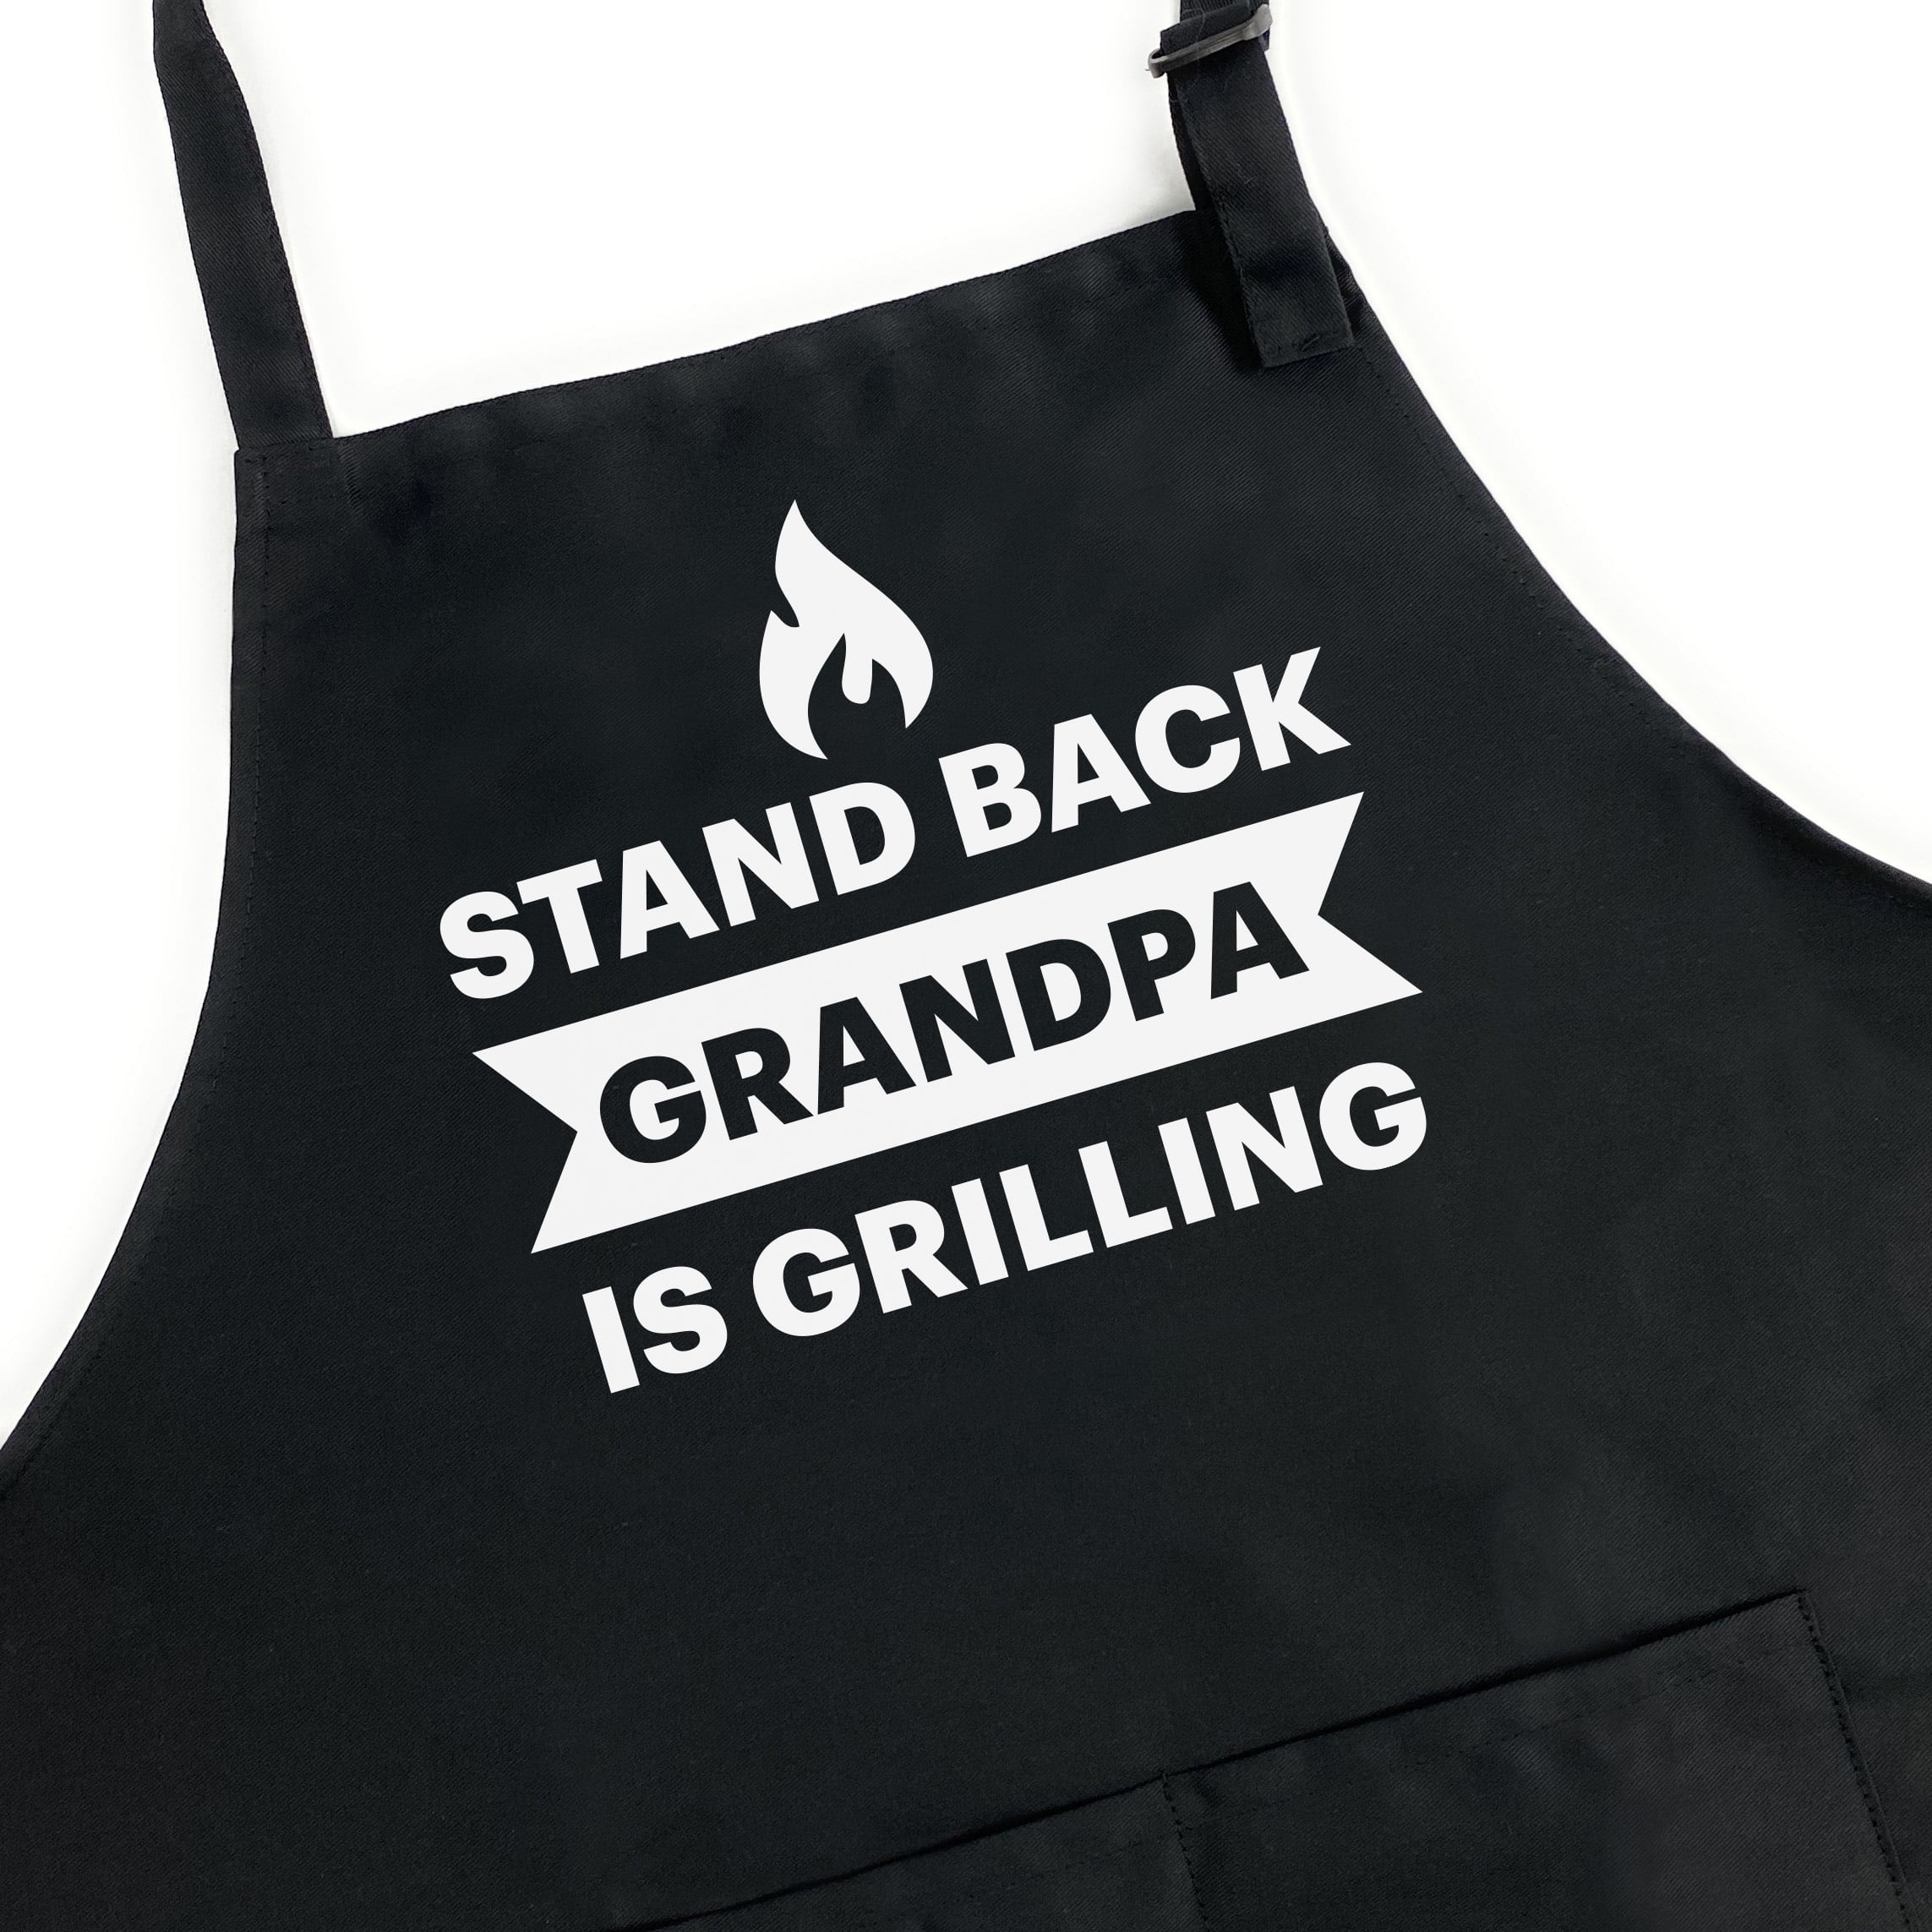 Qweryboo Funny Dad Grilling Aprons for Men, BBQ Grill King Chef Apron, Kitchen Cooking Apron for Gifts(Grill 1)